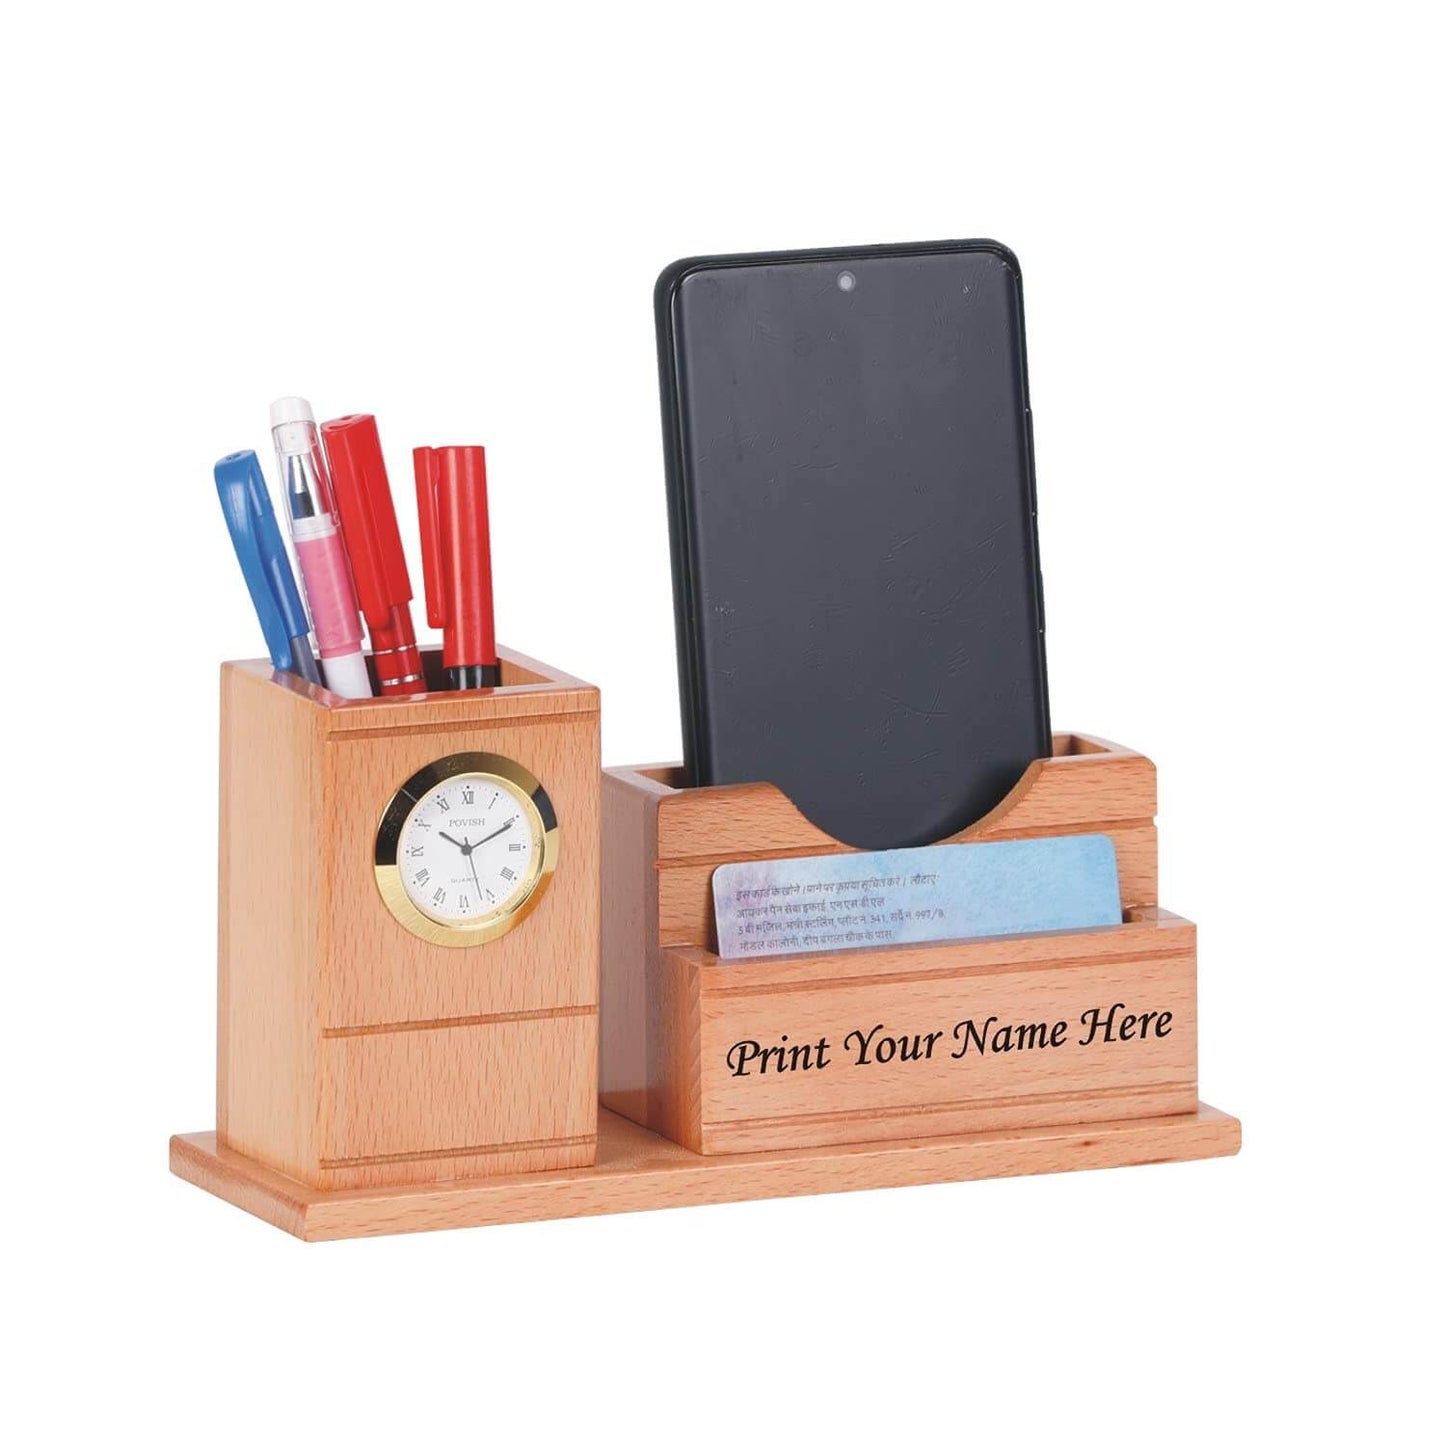 Wooden Pen Holder with Watch, Visiting Card, Mobile Phone Holder